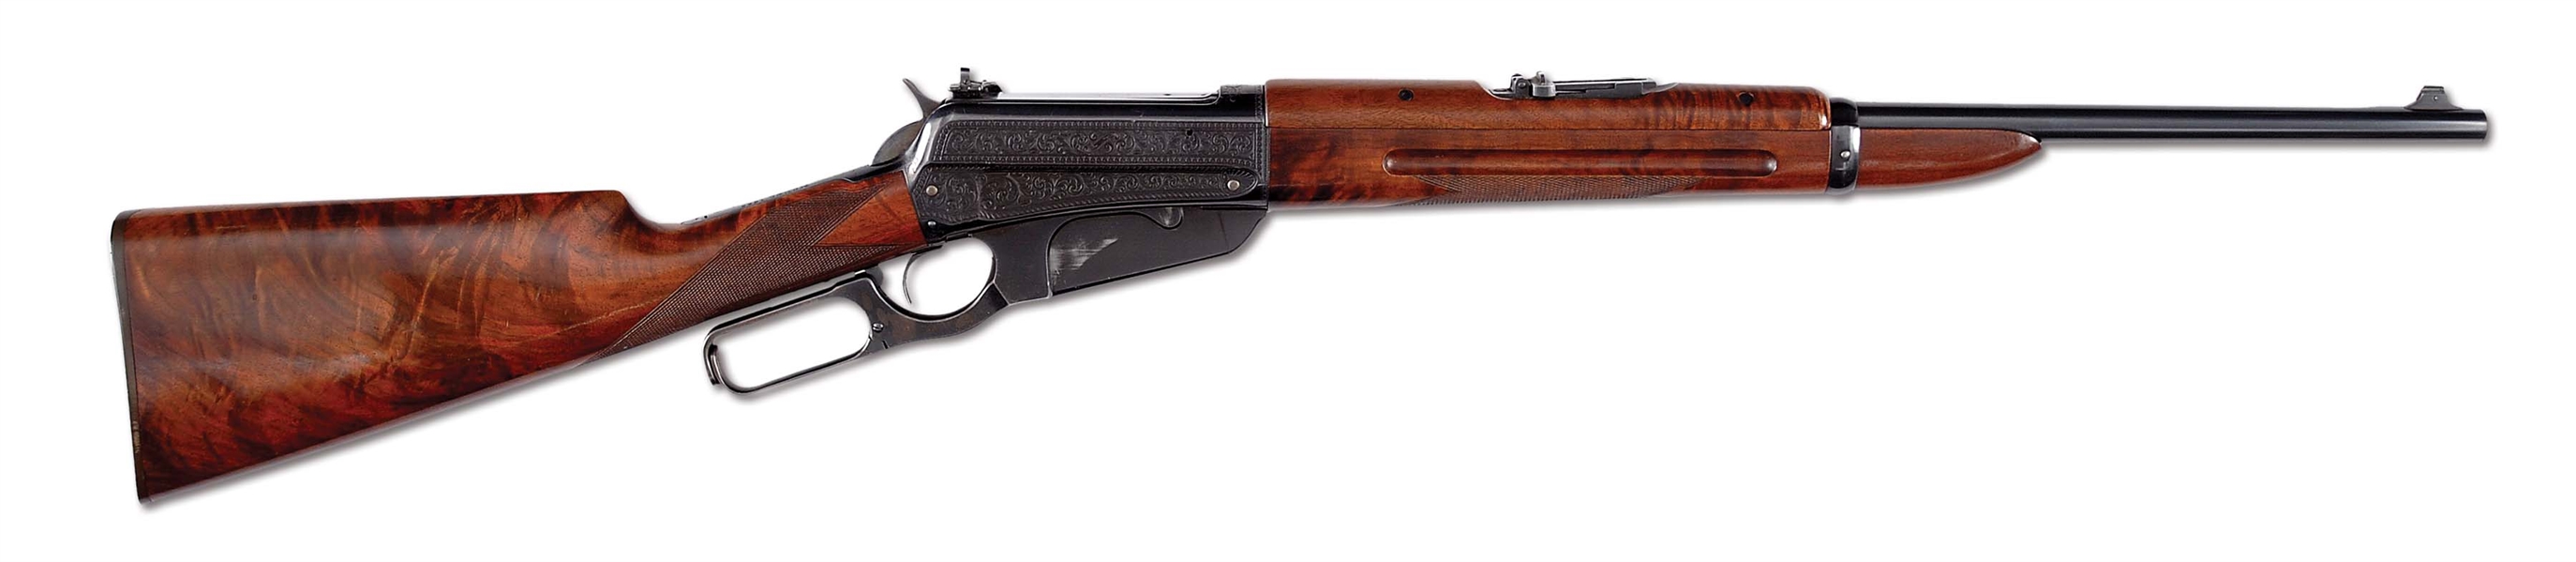 (C) ONLY KNOWN FACTORY ENGRAVED DELUXE WINCHESTER 1895 CARBINE WITH FACTORY LETTER (1905).